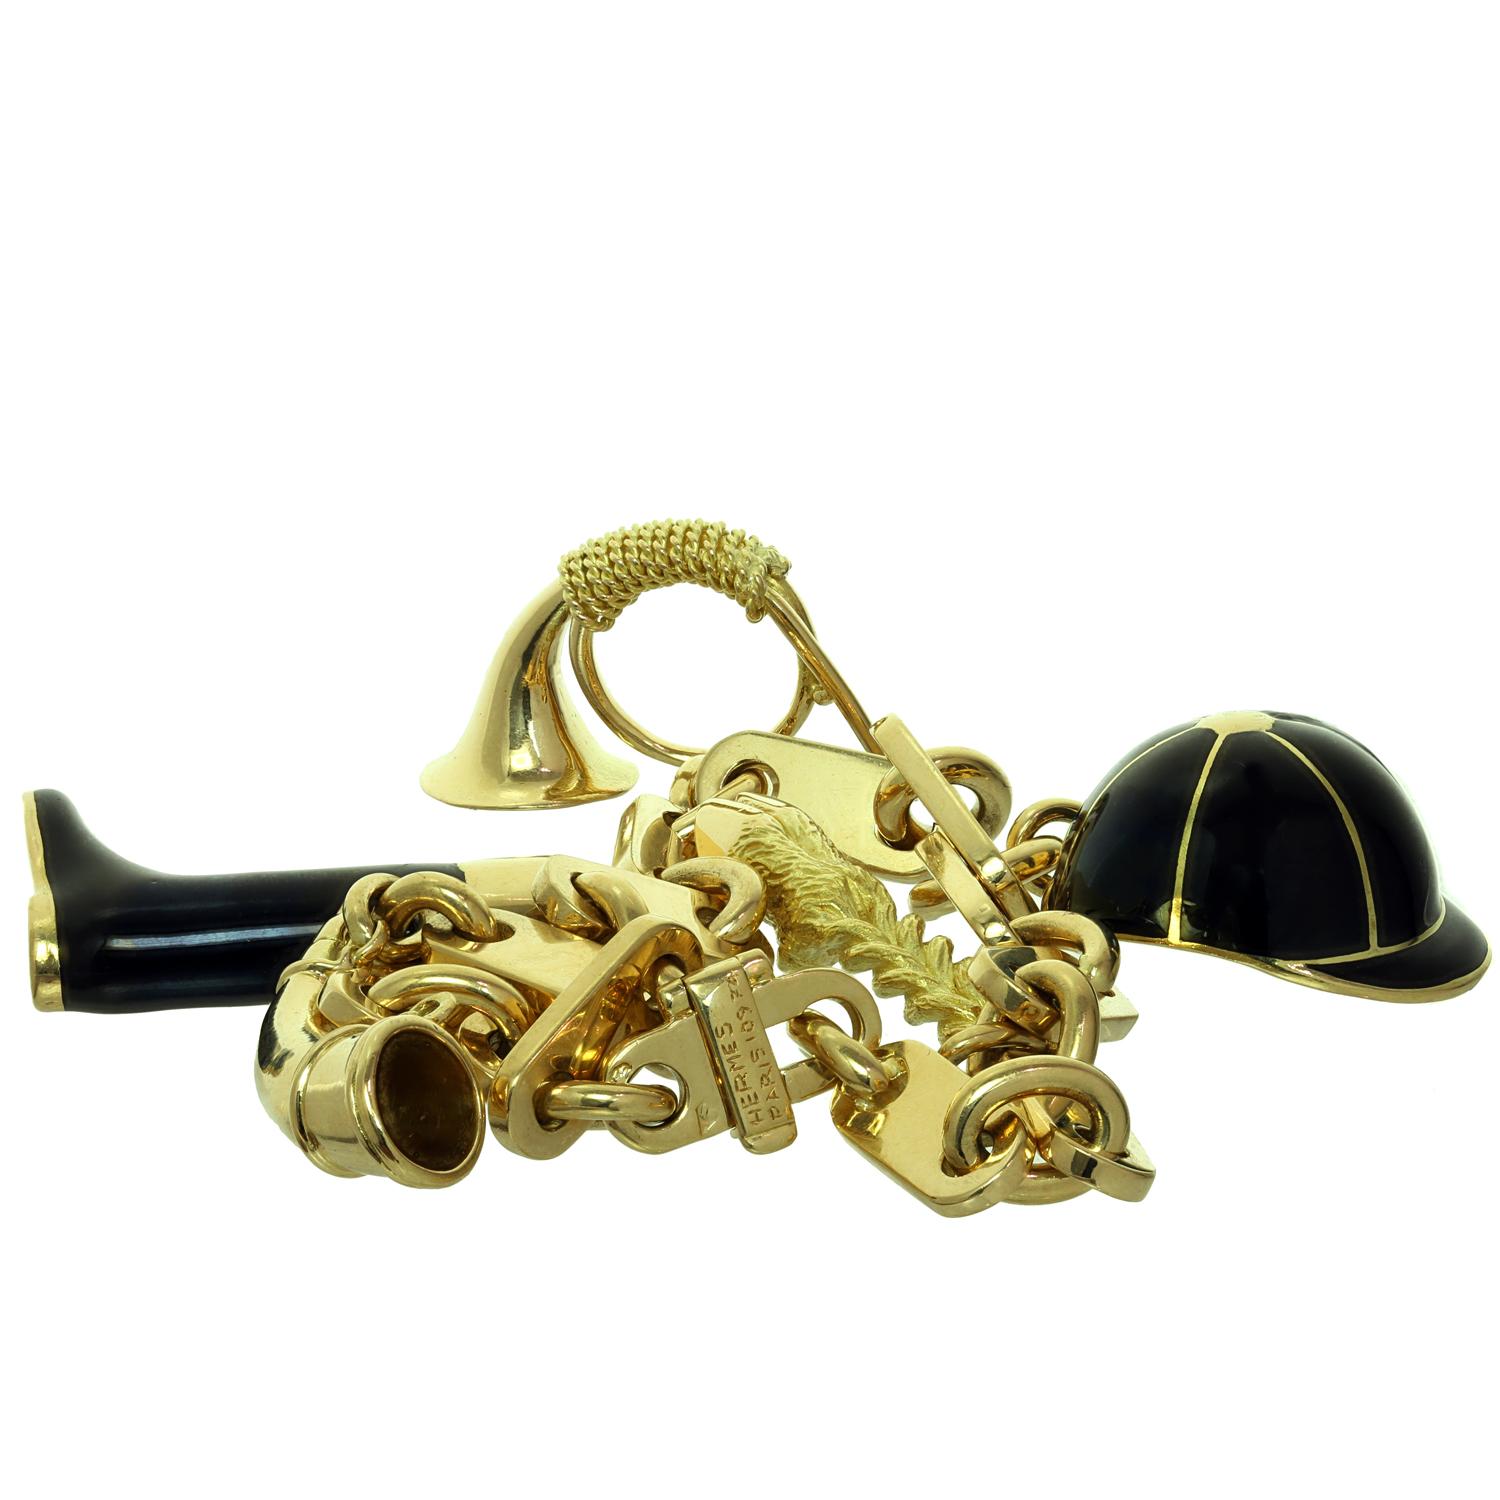 Hermes Paris Horse Rider Black Enamel Yellow Gold Charm Bracelet In Excellent Condition For Sale In New York, NY